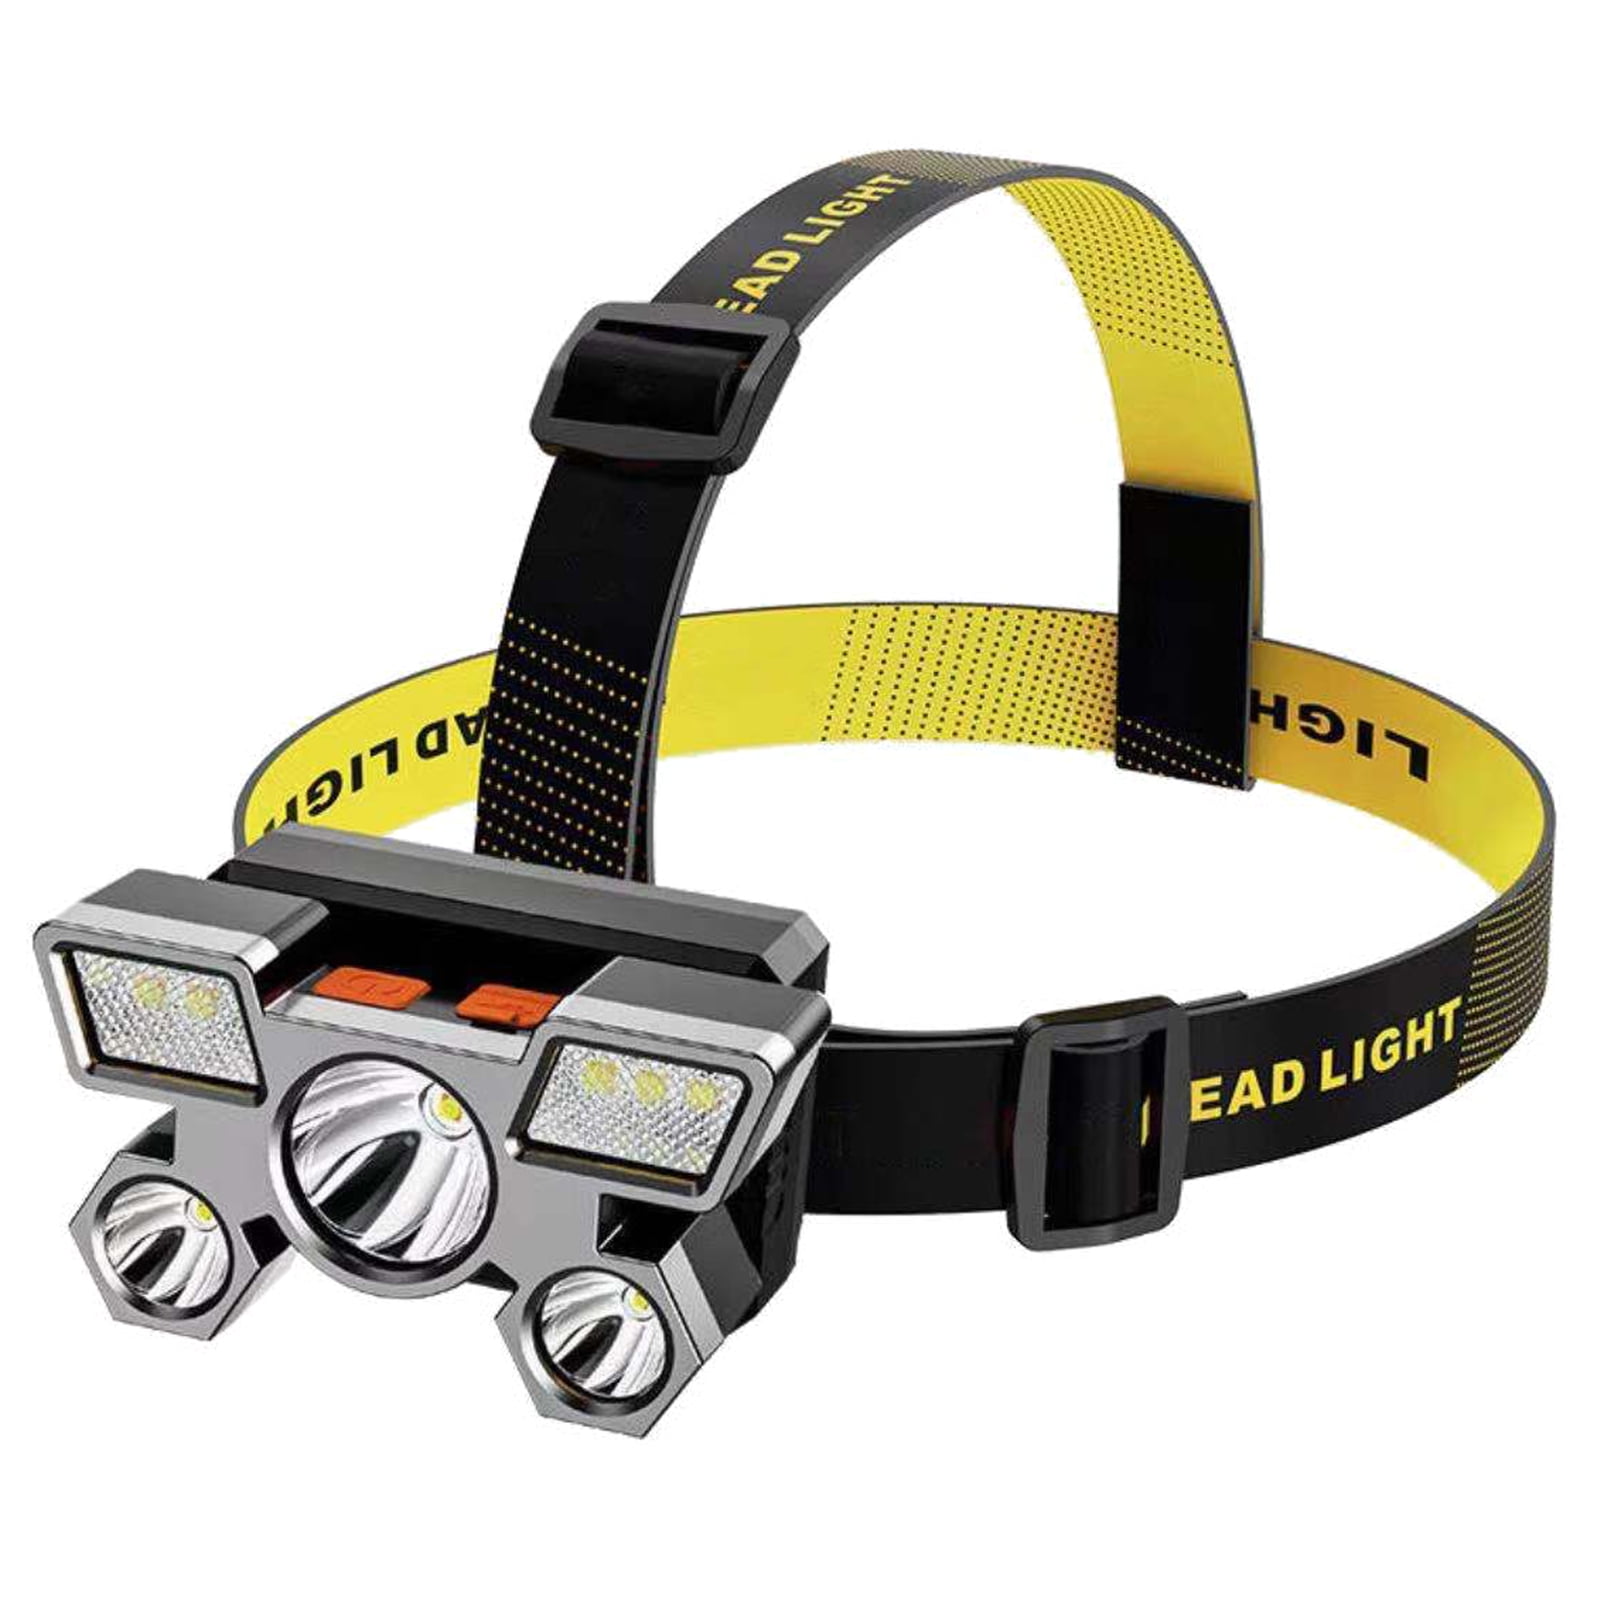 Headlamp,USB Rechargeable LED Head Lamp 4 Modes Switchable Headlight Head Lights for Adults,Camping,Hiking,Outdoors,Hard Hat Work